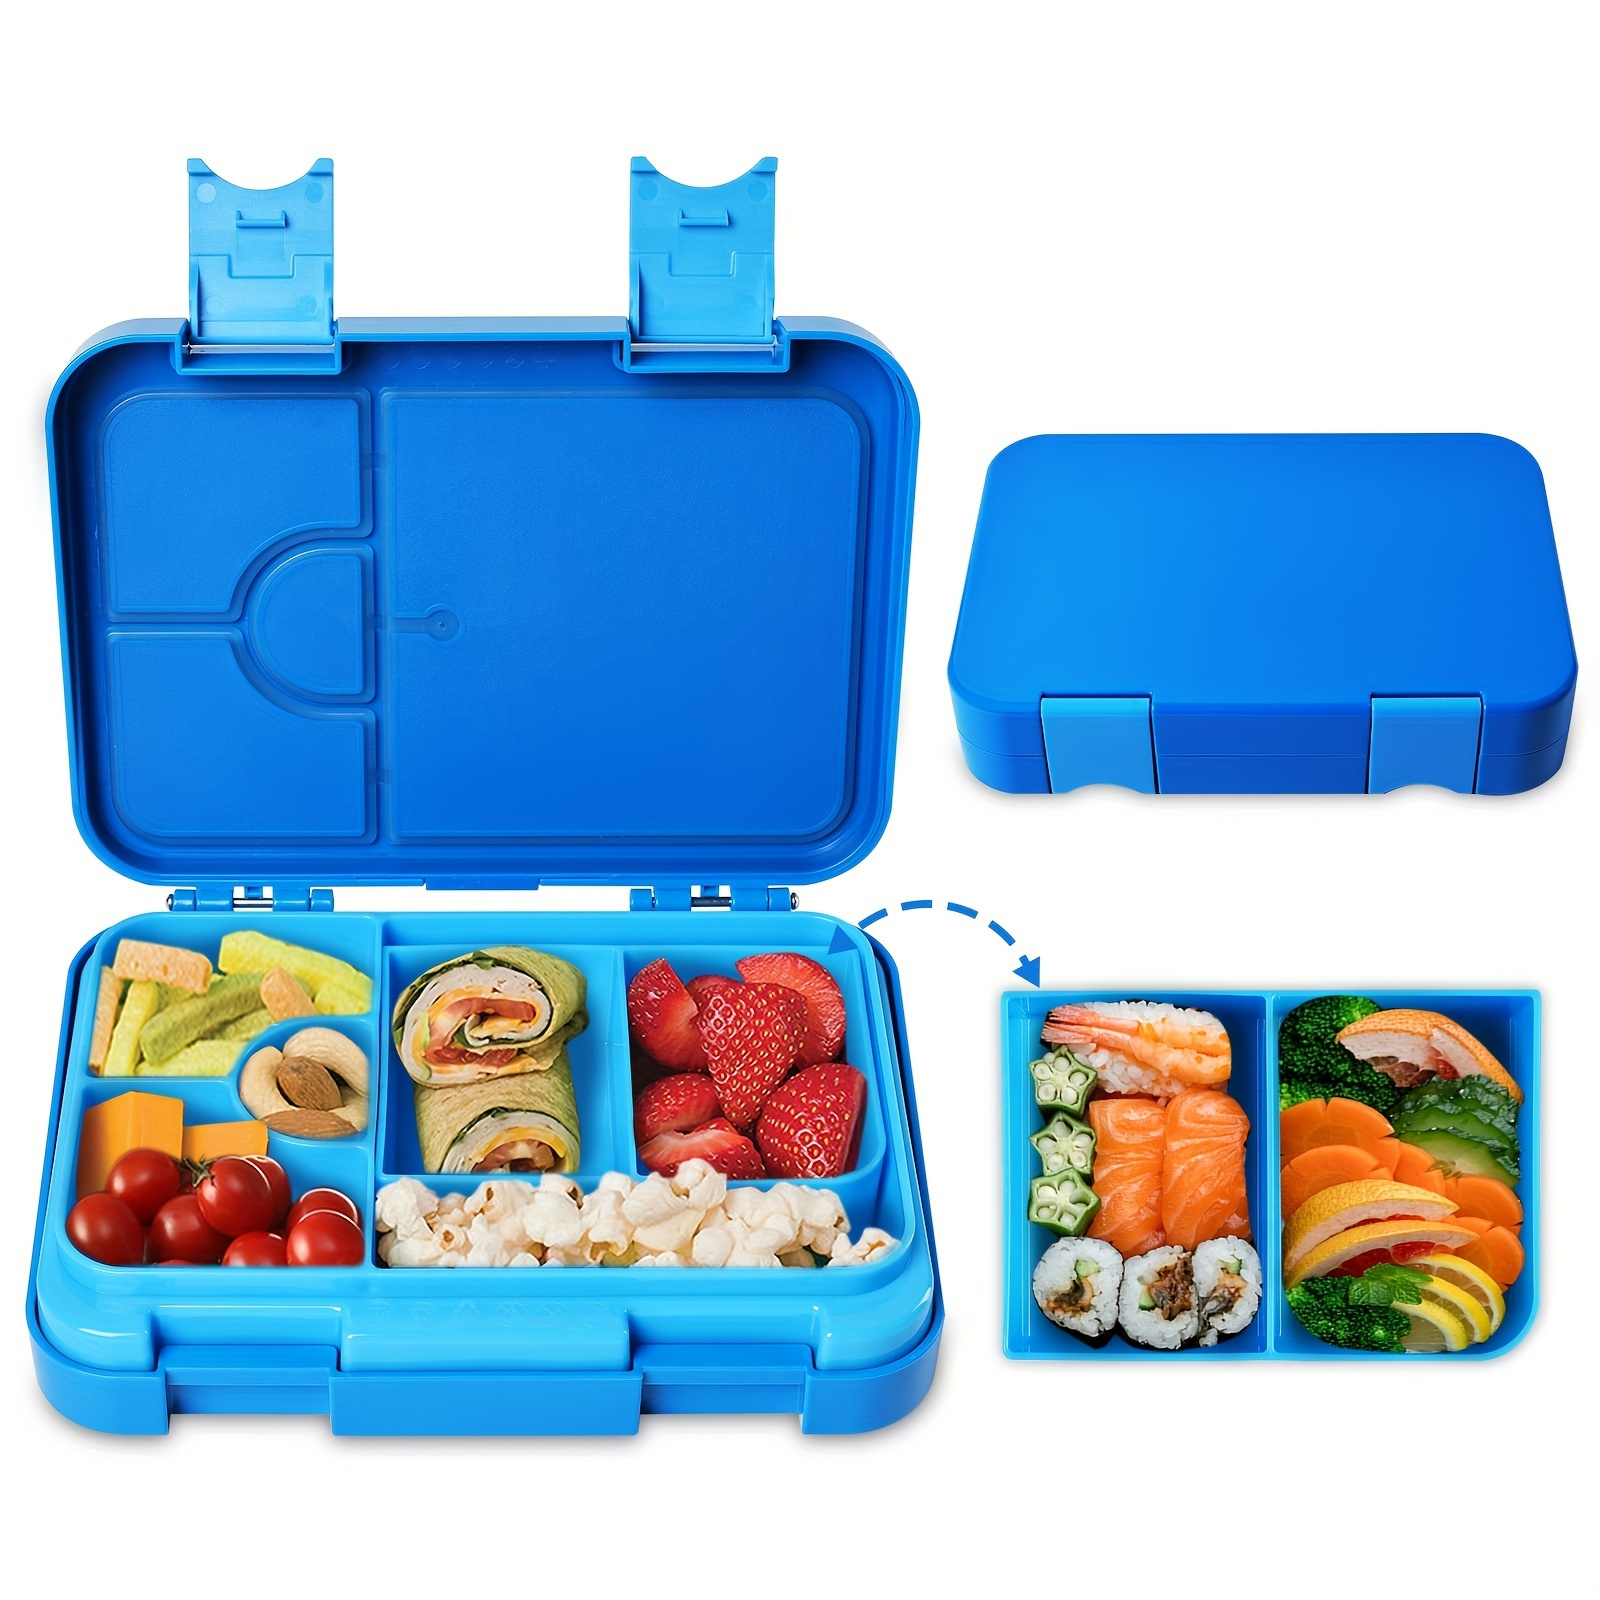 1pc 800ml/27.05oz Aluminum Lunch Box With Handle, Rectangular Lunch  Containers For Outdoor Camping Travel